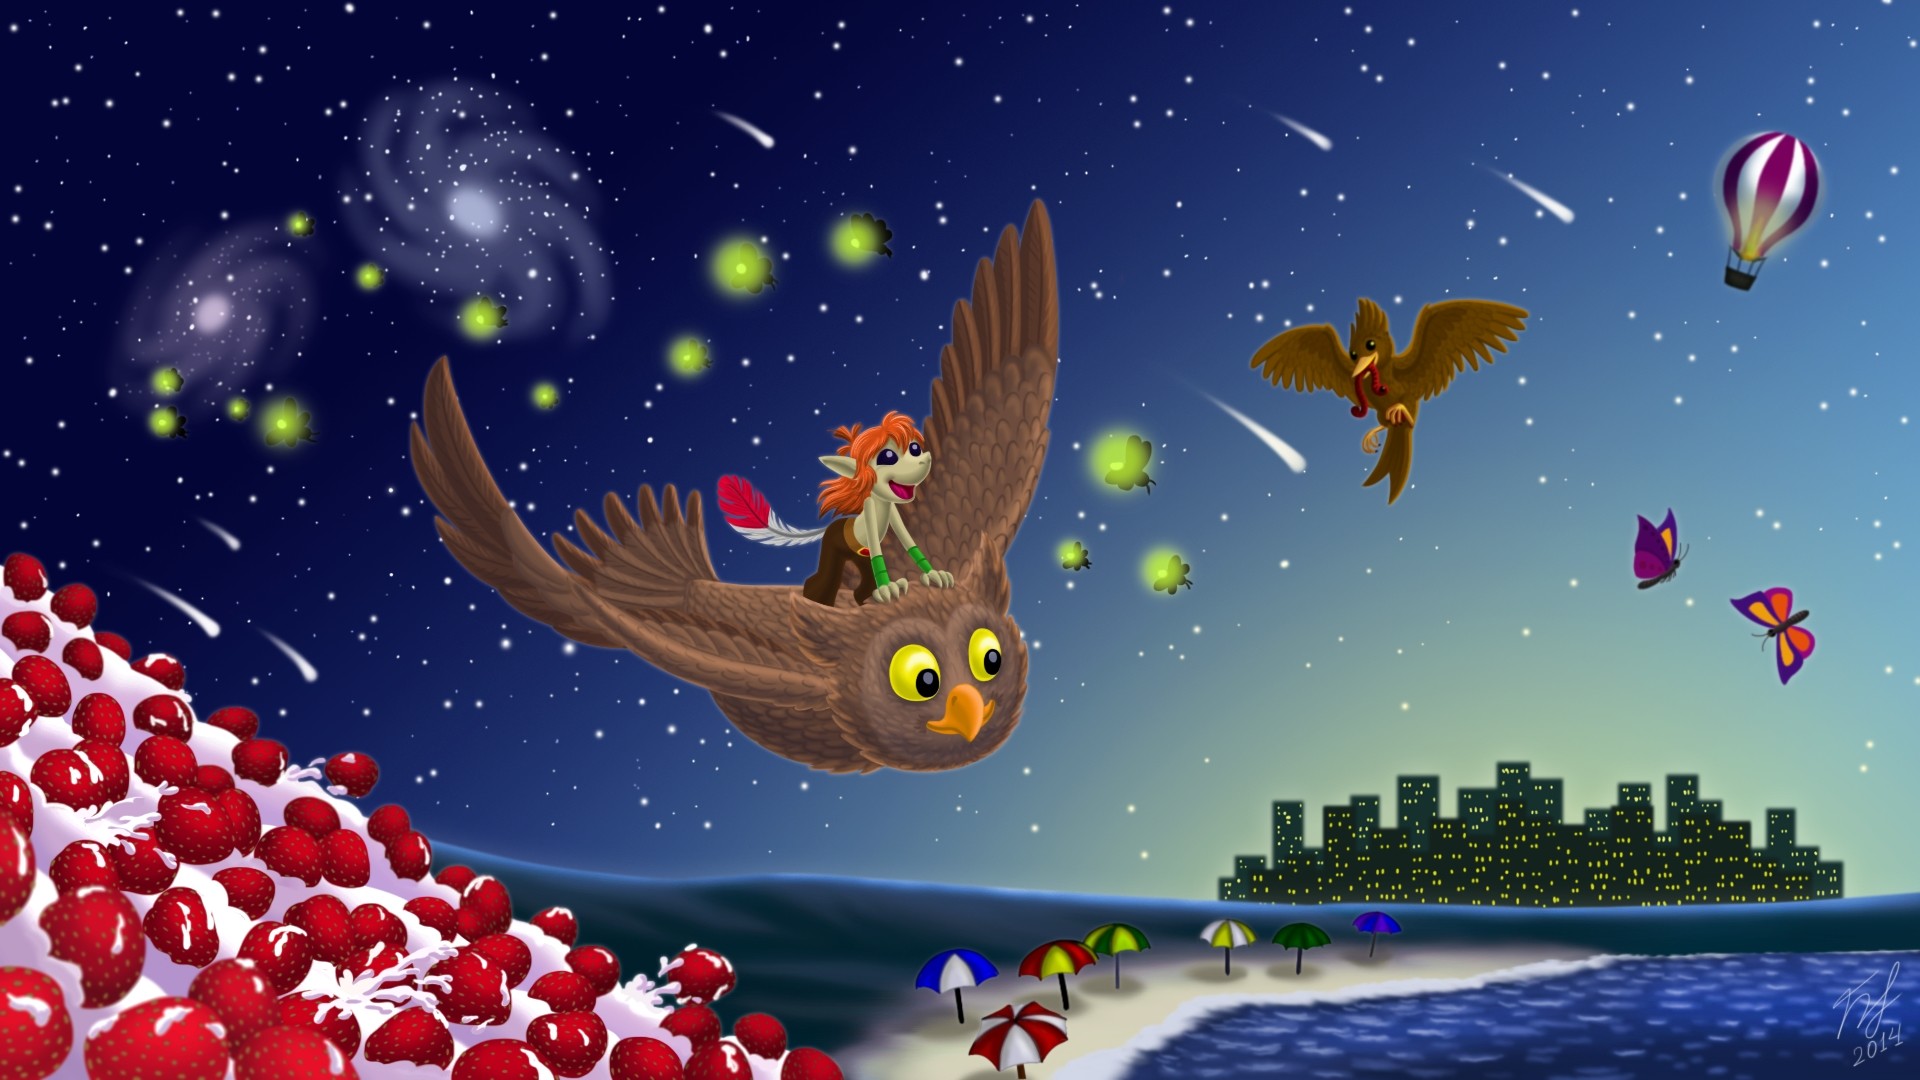 1920x1080 ... Owl City by Goldy--Gry